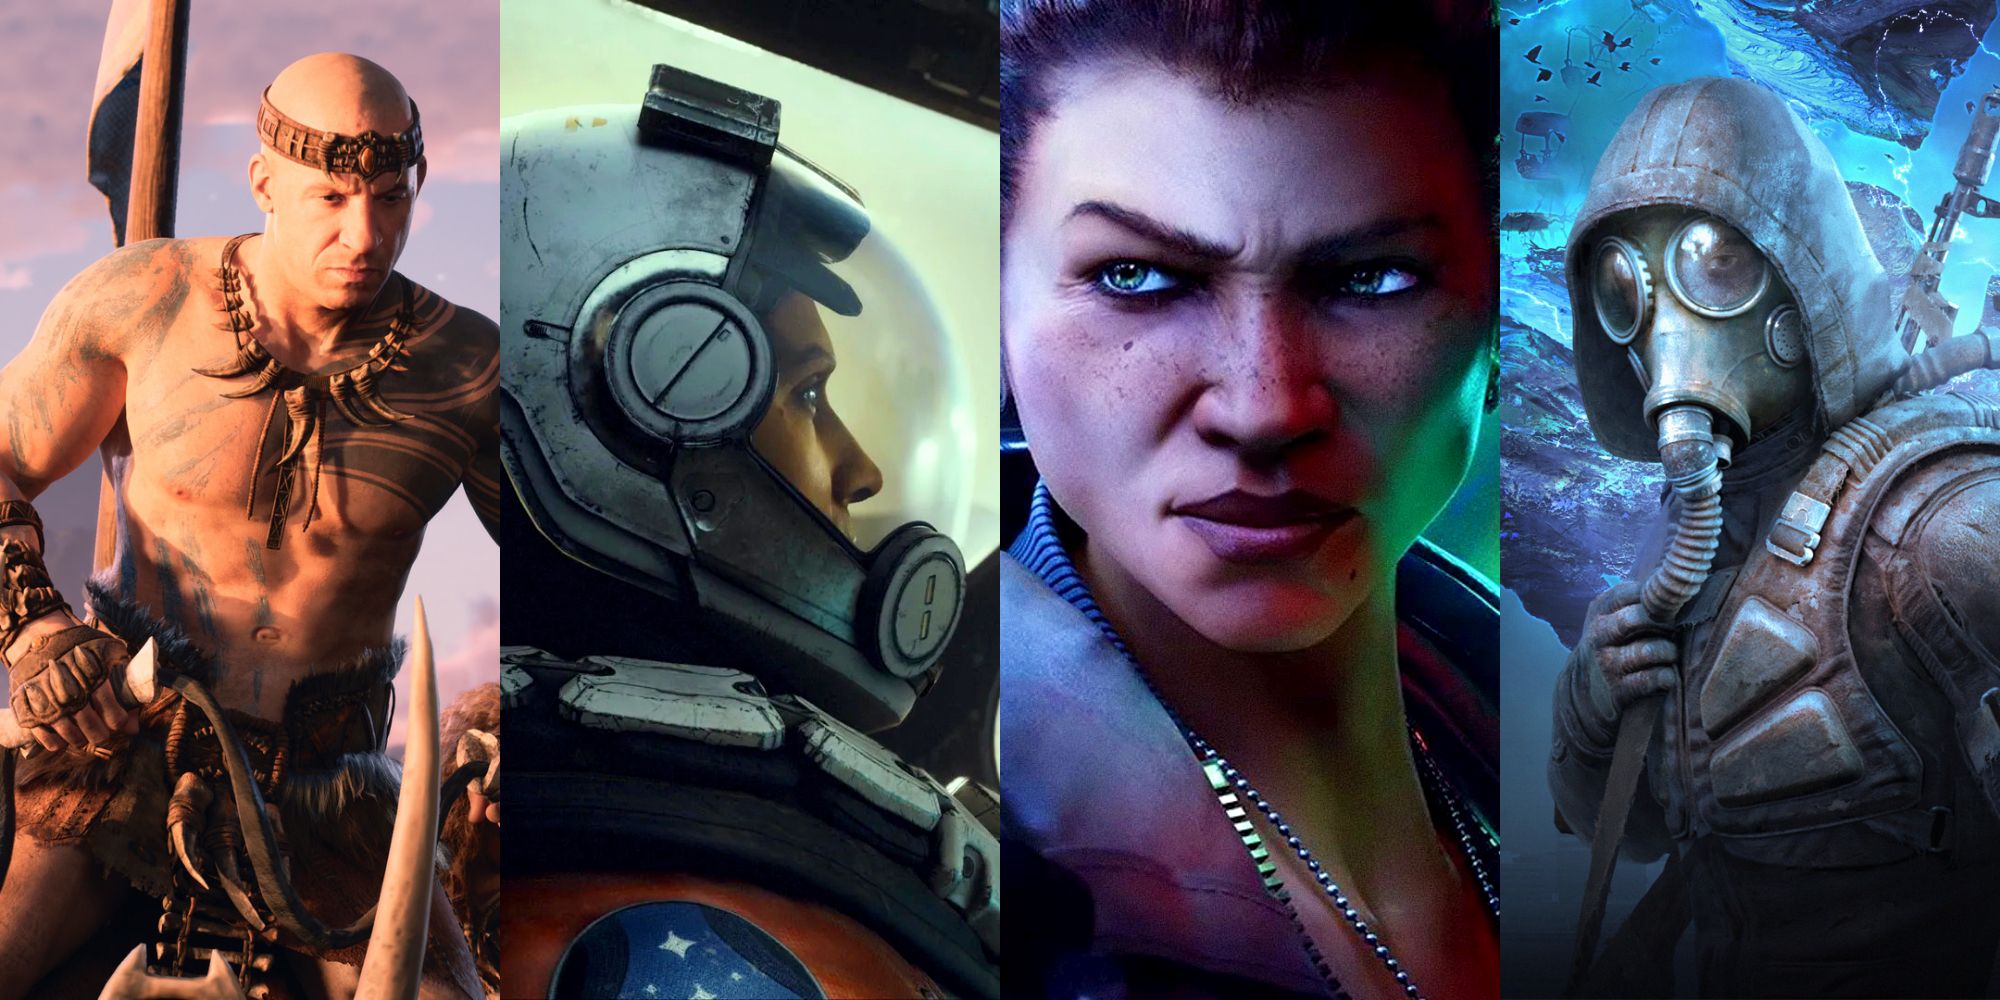 An image split vertically to show characters from four Xbox games expected to launch in 2023, from left to right: Vin Diesel's character from Ark 2, an astronaut in Starfield, one of the main characters in Redfall, and someone wearing a gas mask from Stalker 2: Heart of Chernobyl.